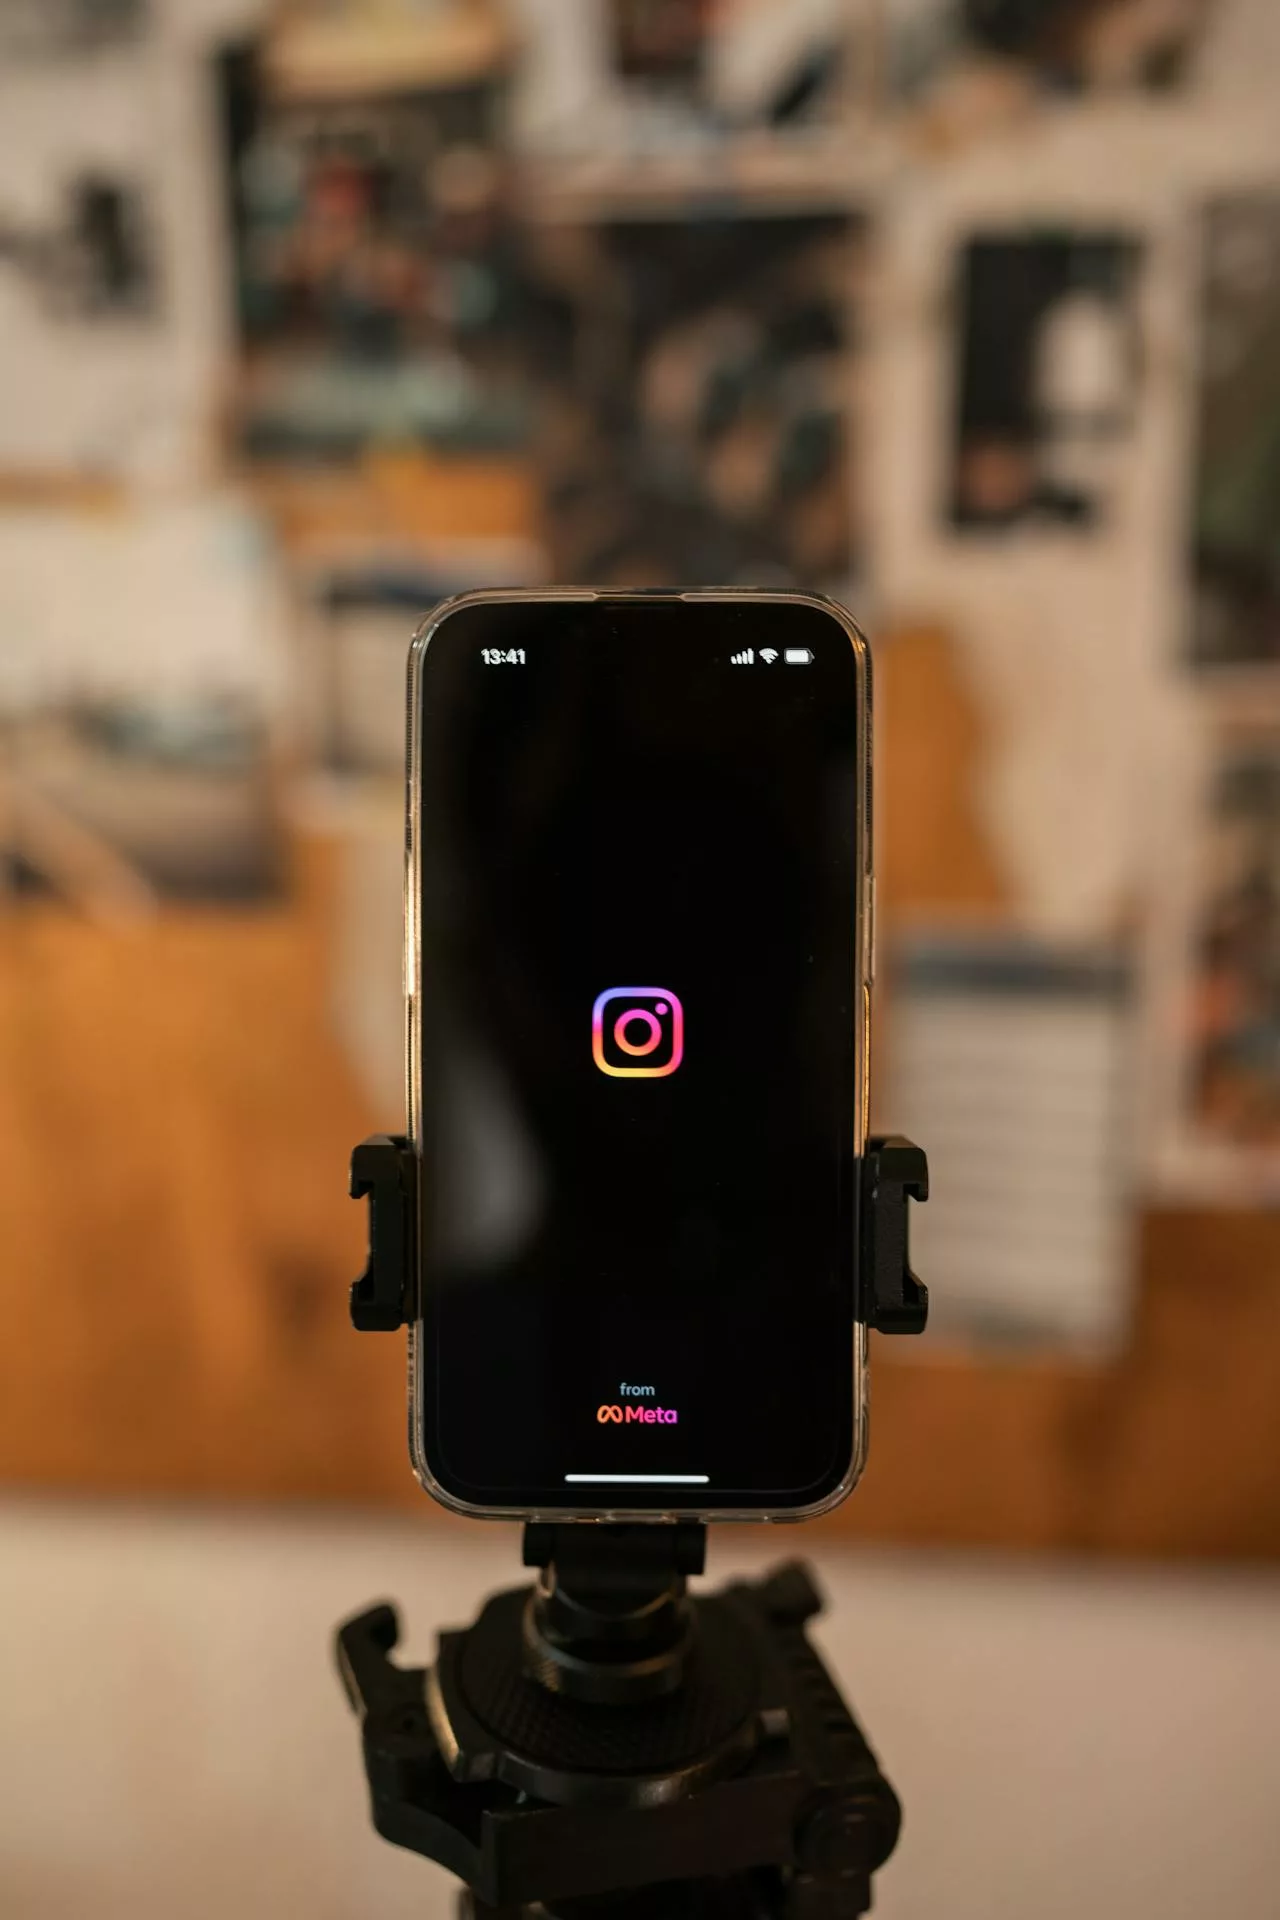 How To Watch Instagram Stories Anonymously?